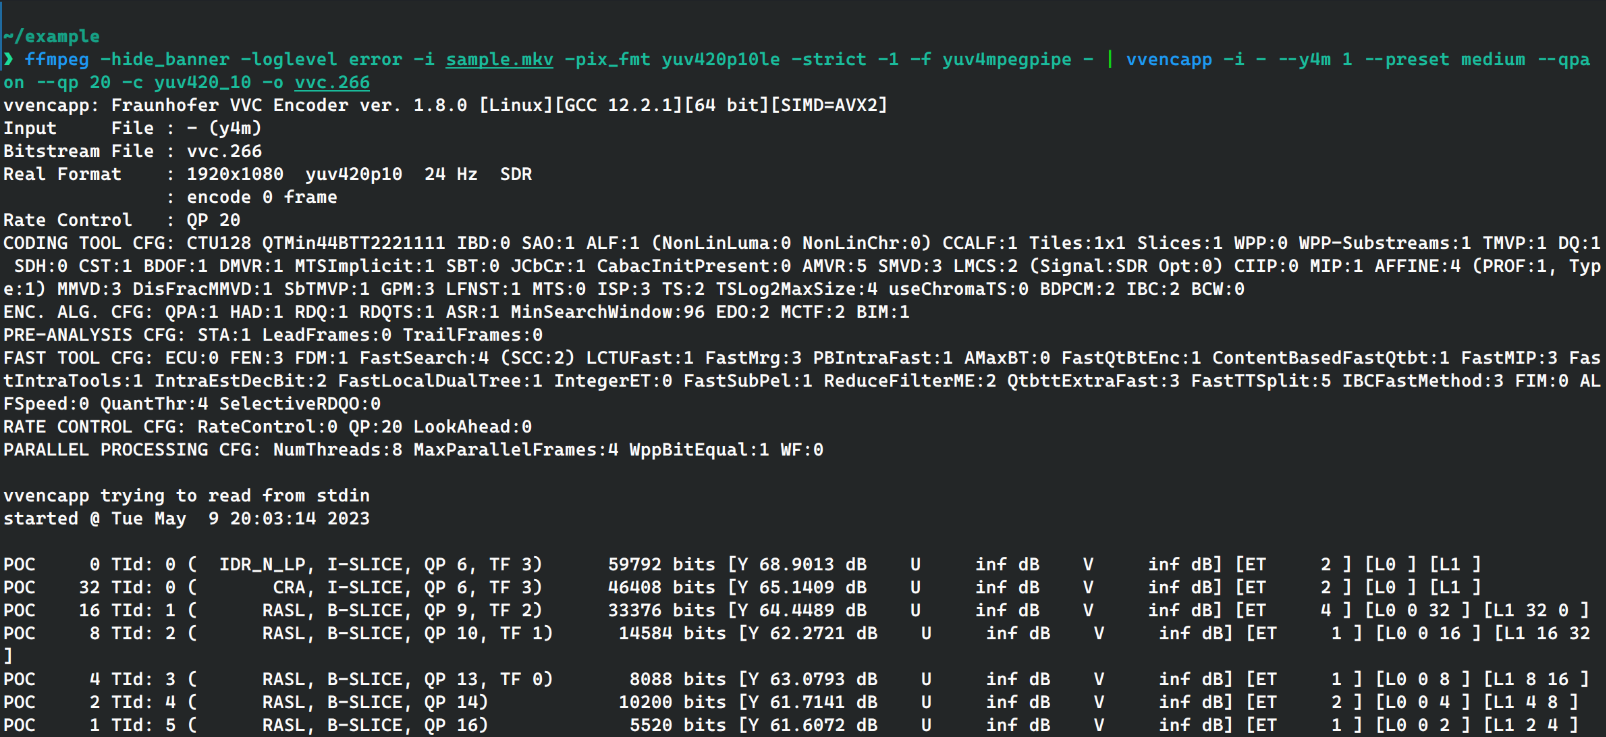 vvencapp spamming the terminal output with progress per-picture-order-count cause god knows why